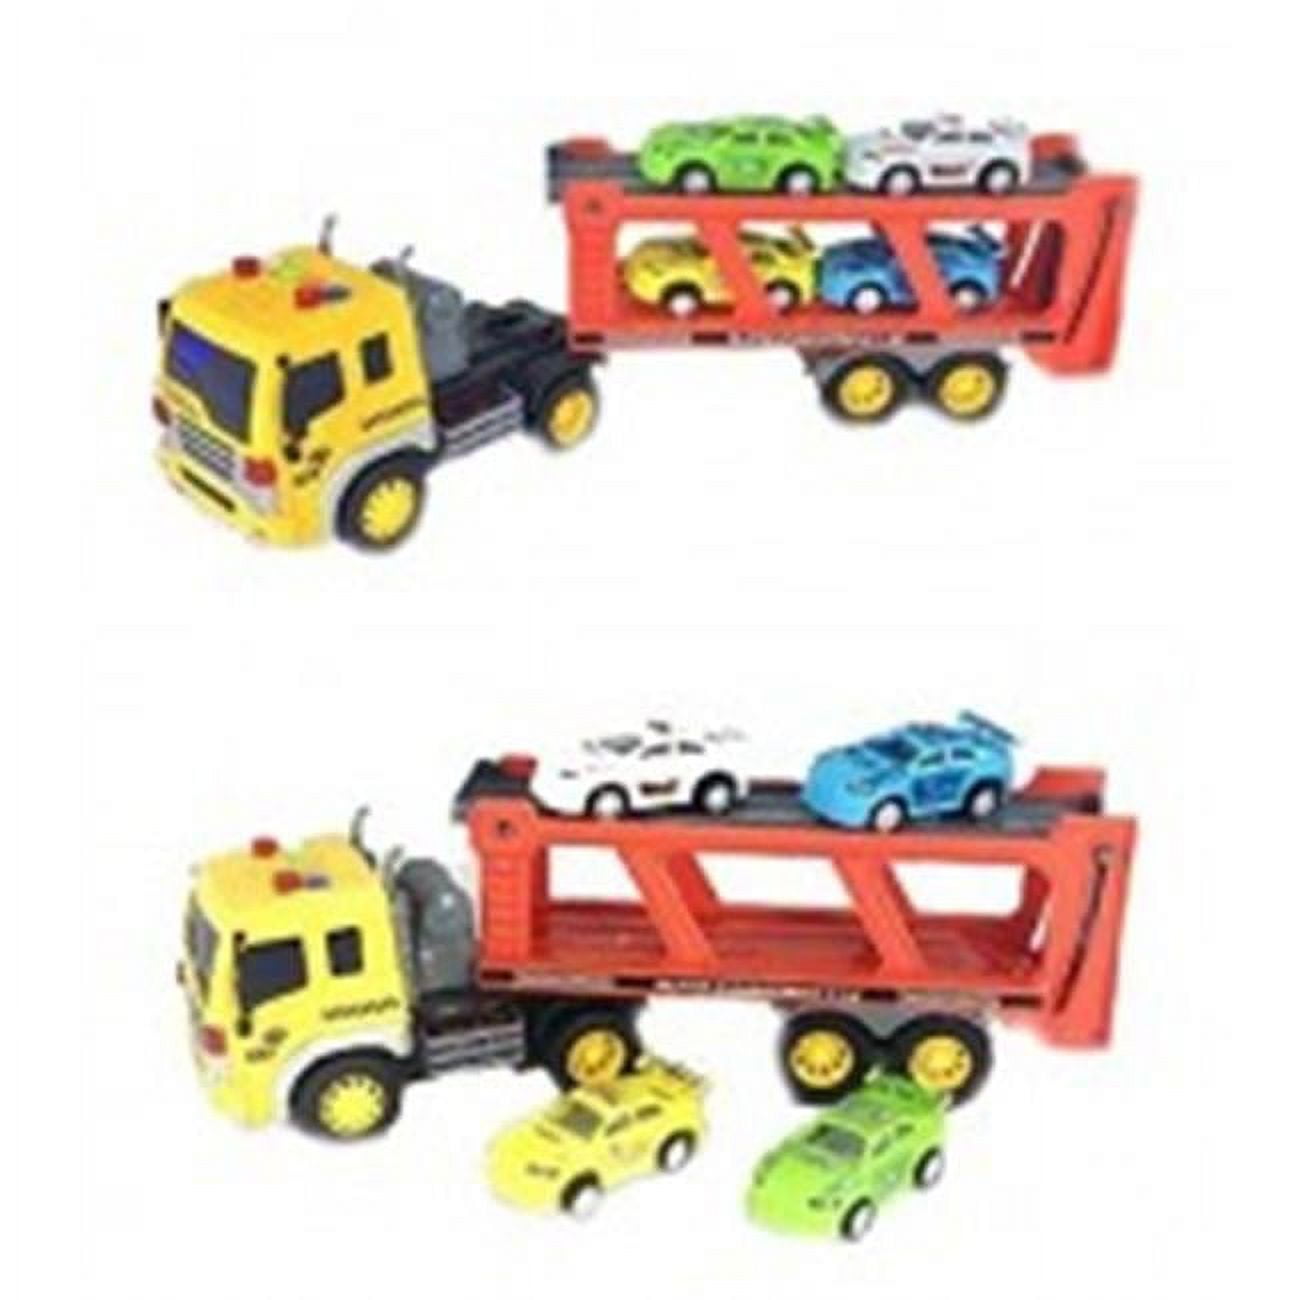 1-16 Friction Powered Car Transporter Truck With Lights & Sounds